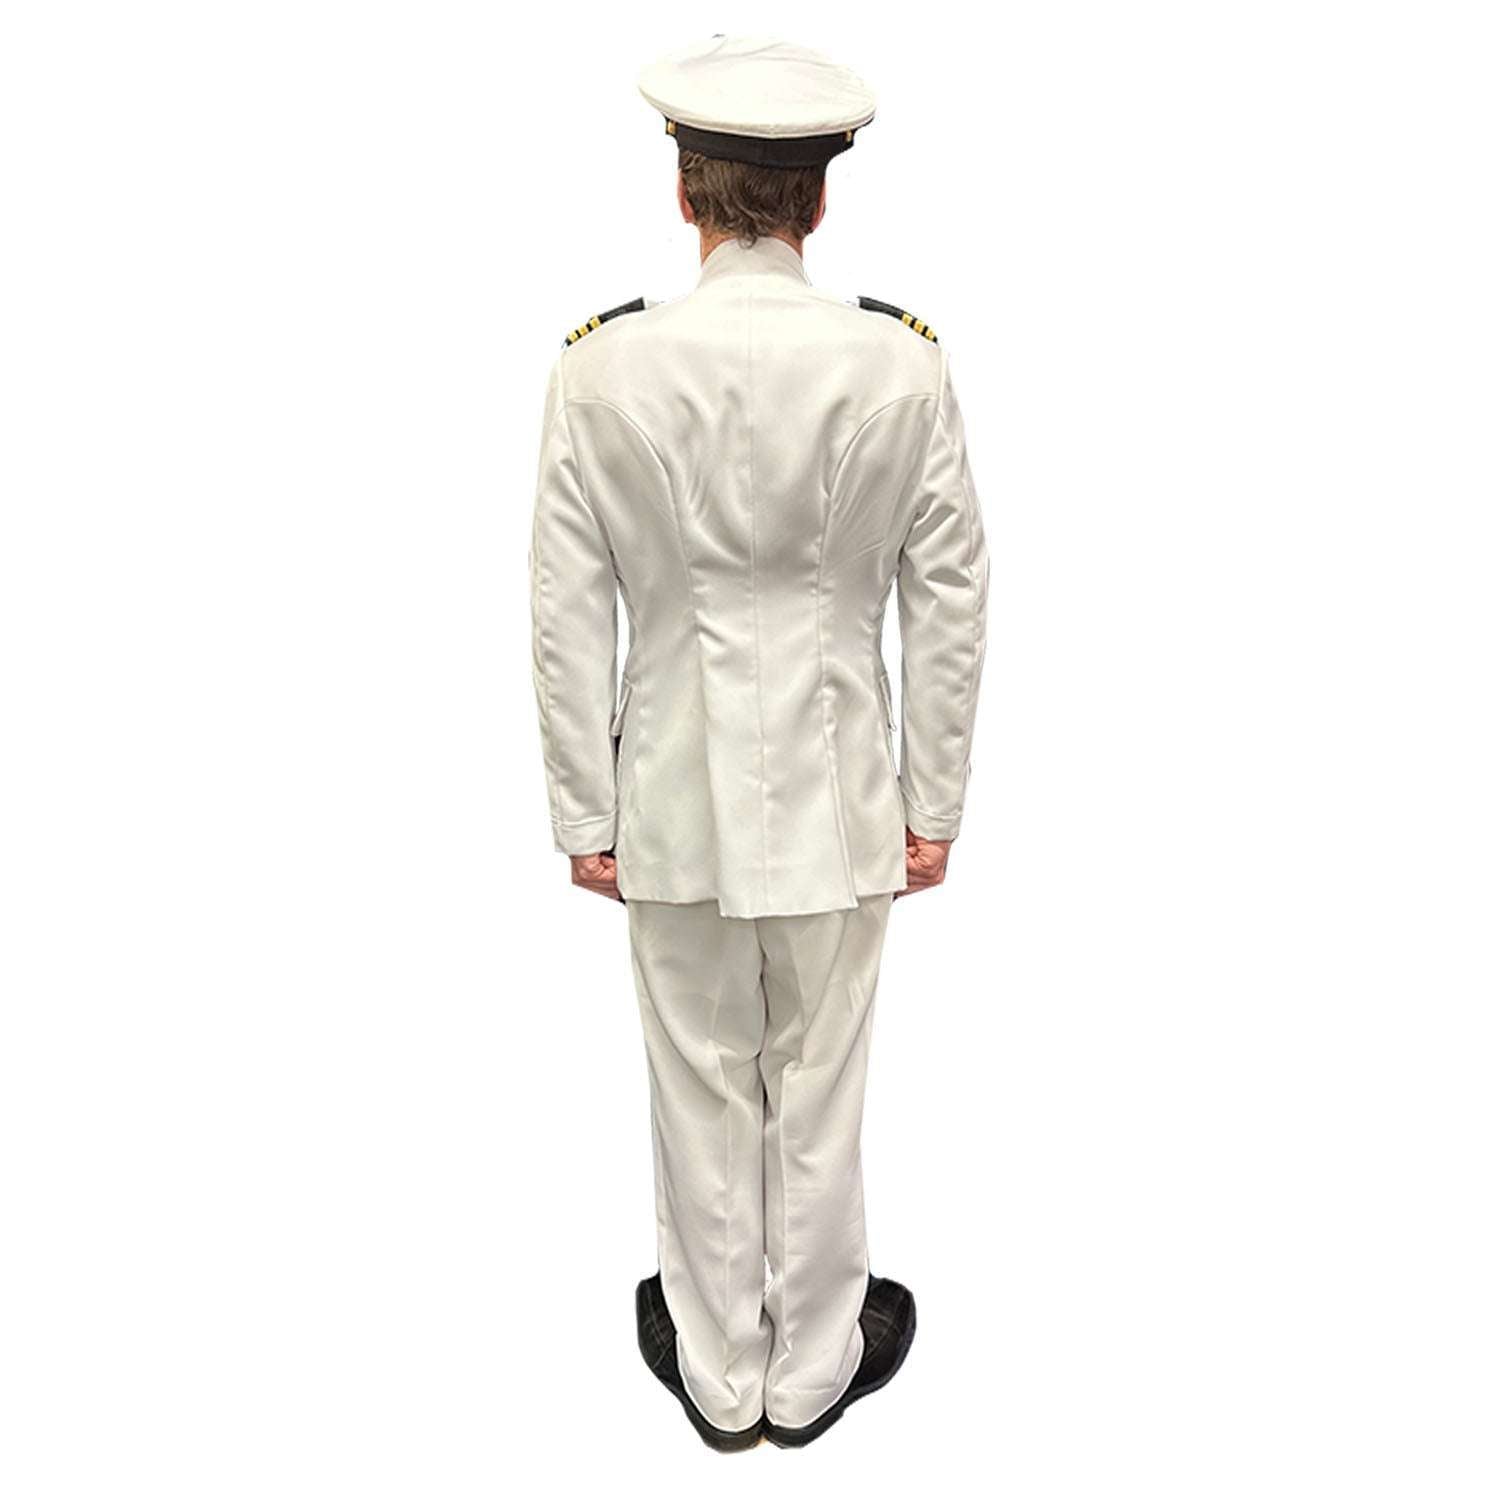 Production Quality USN Navy Admiral Adult Uniform Costume